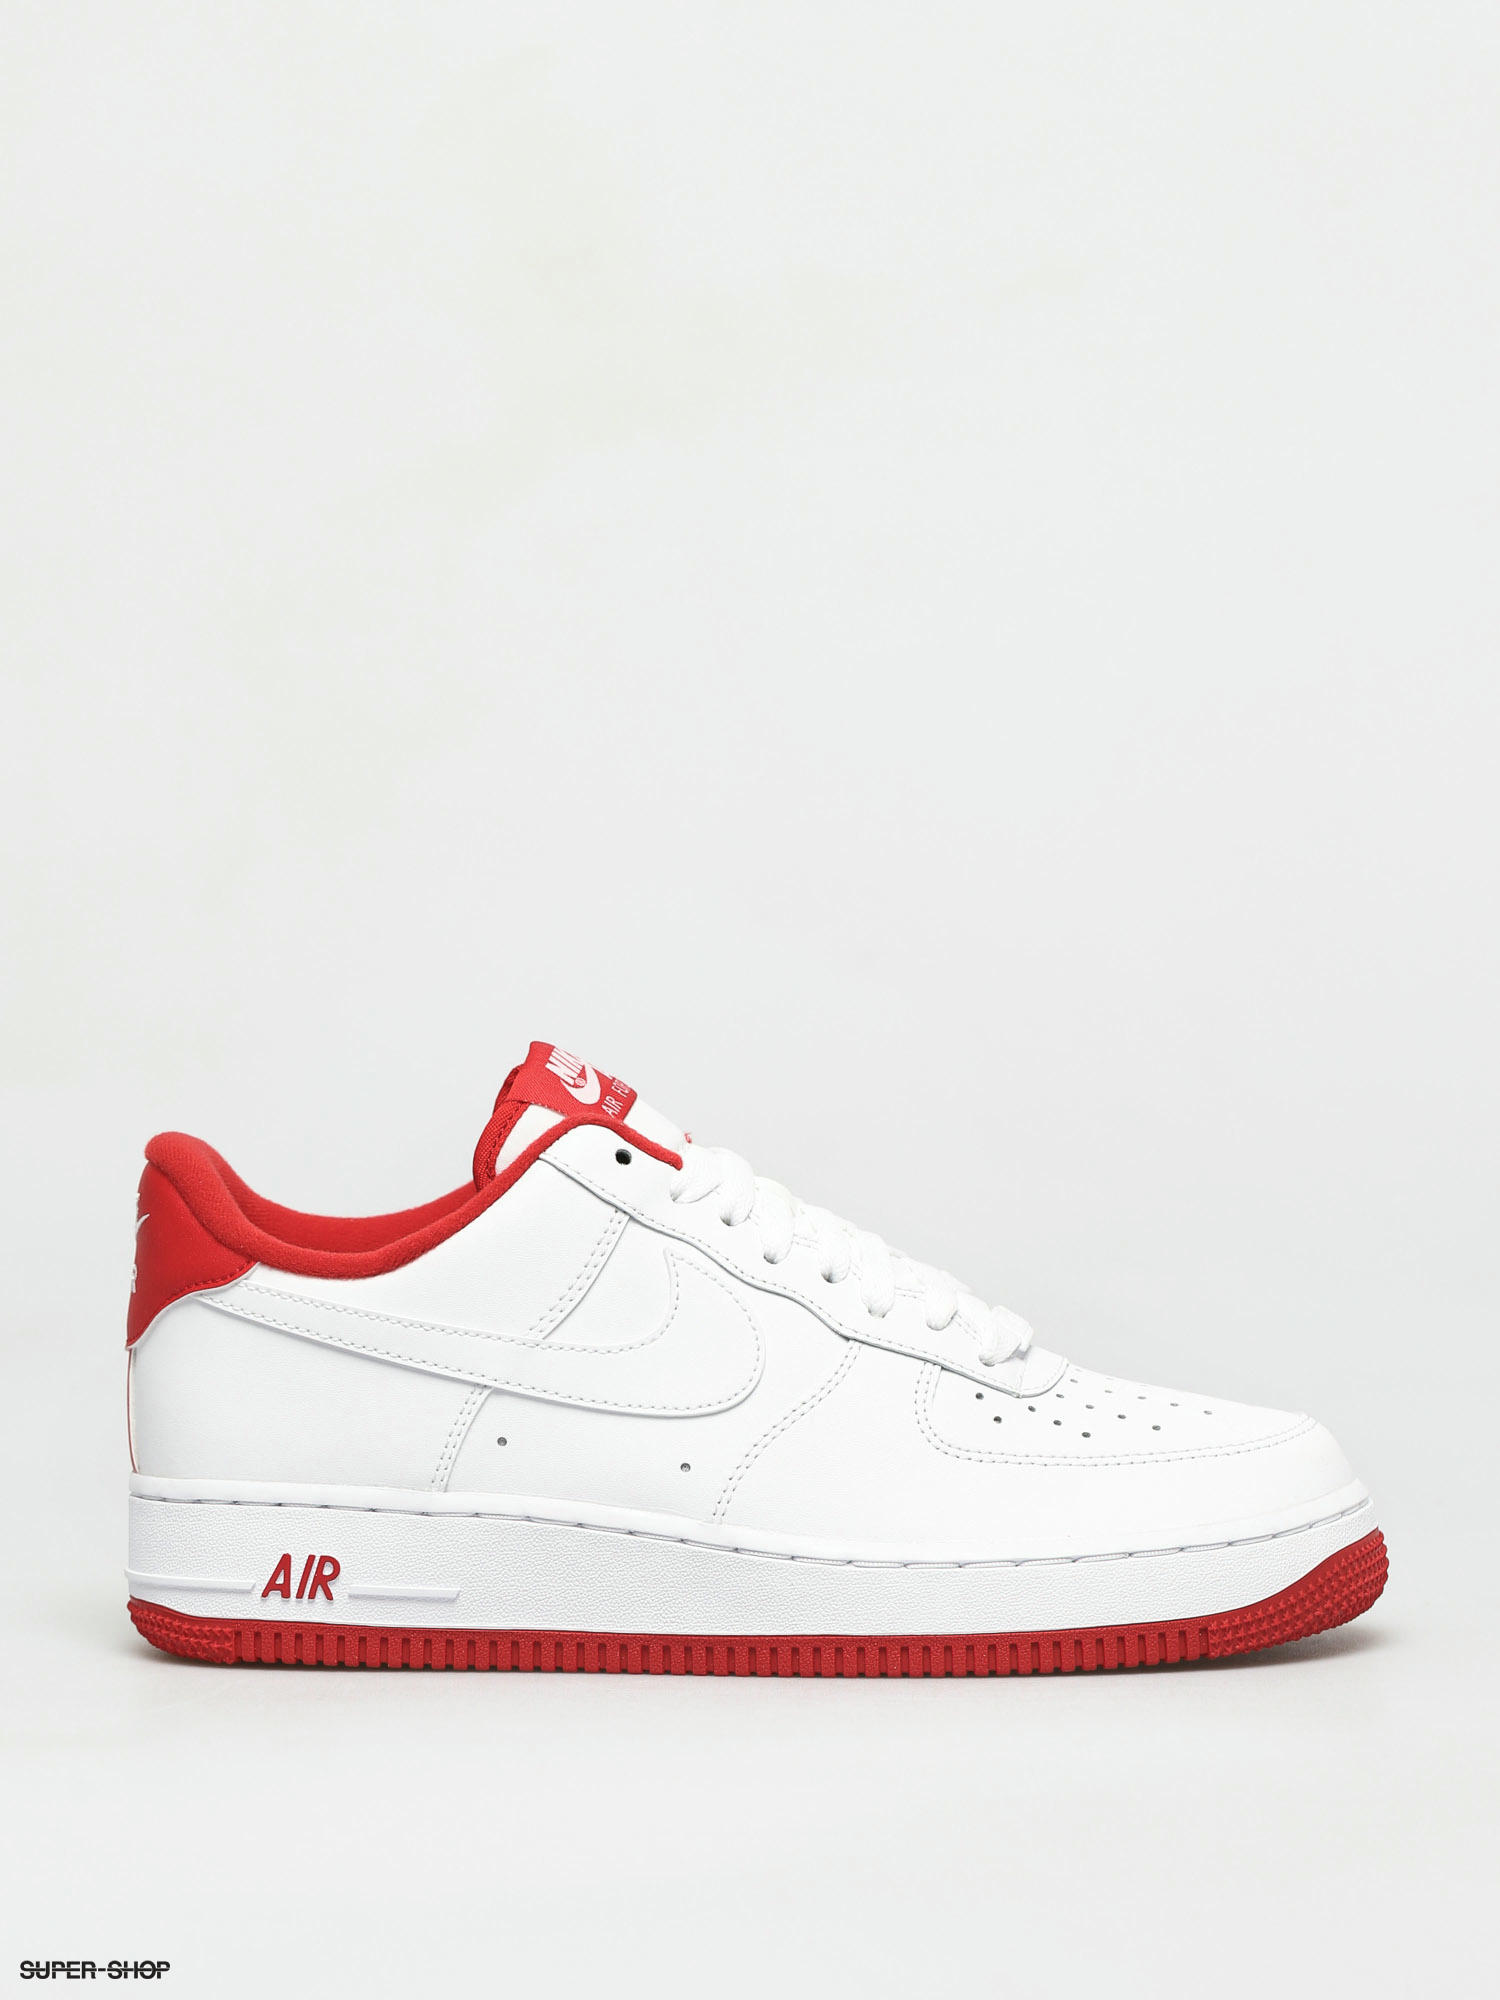 Nike Men's Air Force 1 '07 Shoes, Size 11.5, White/Red